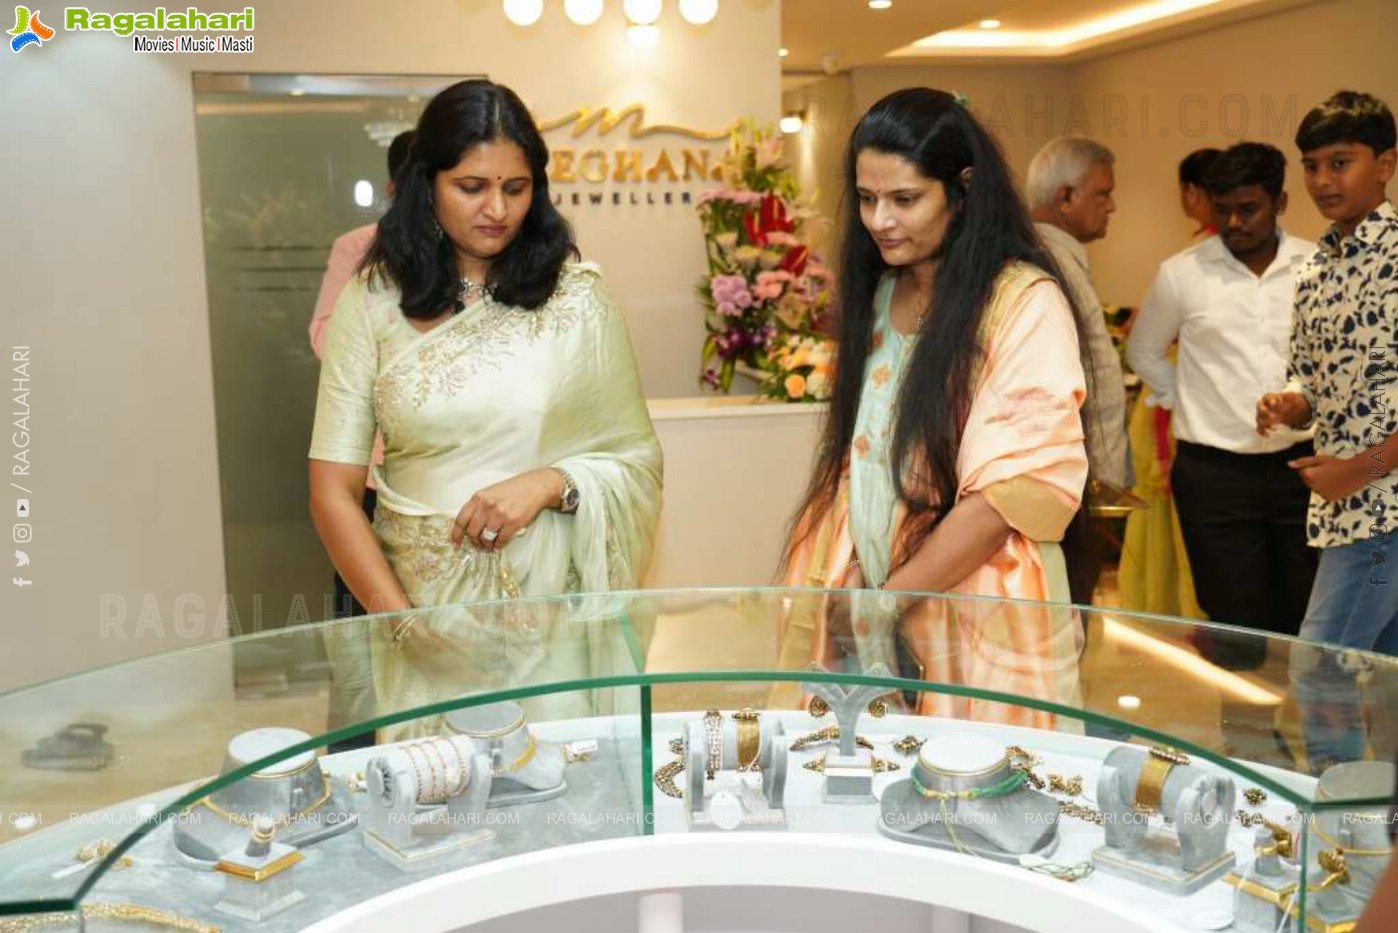 Meghana Jewellers Launch Flagship Store, Hyderabad